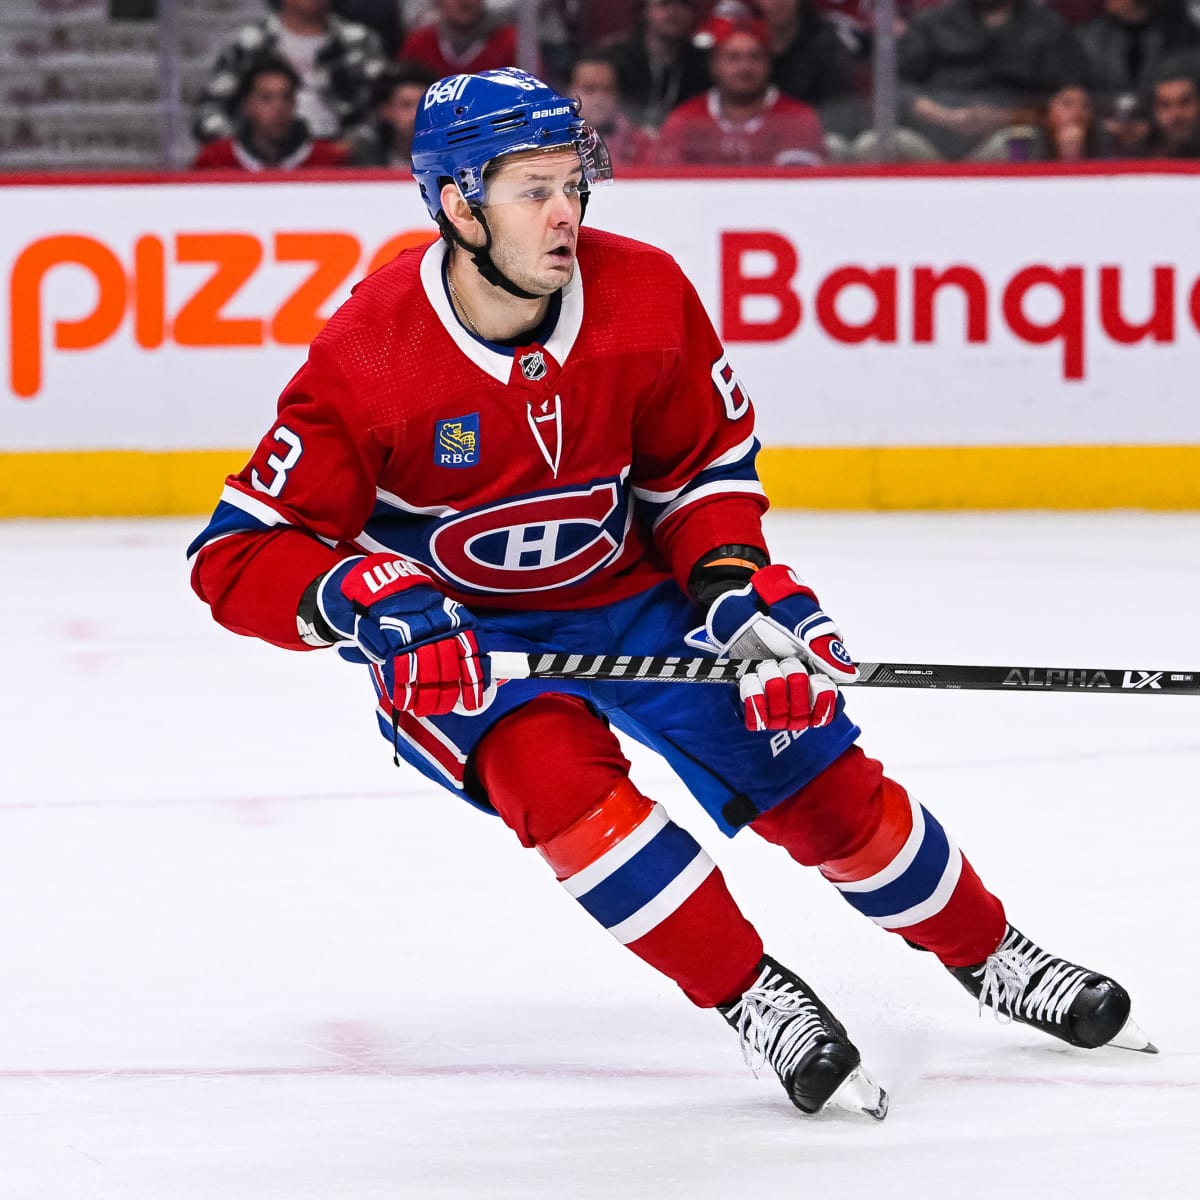 Montreal Canadiens trade Edmundson to Capitals, Drouin signs with